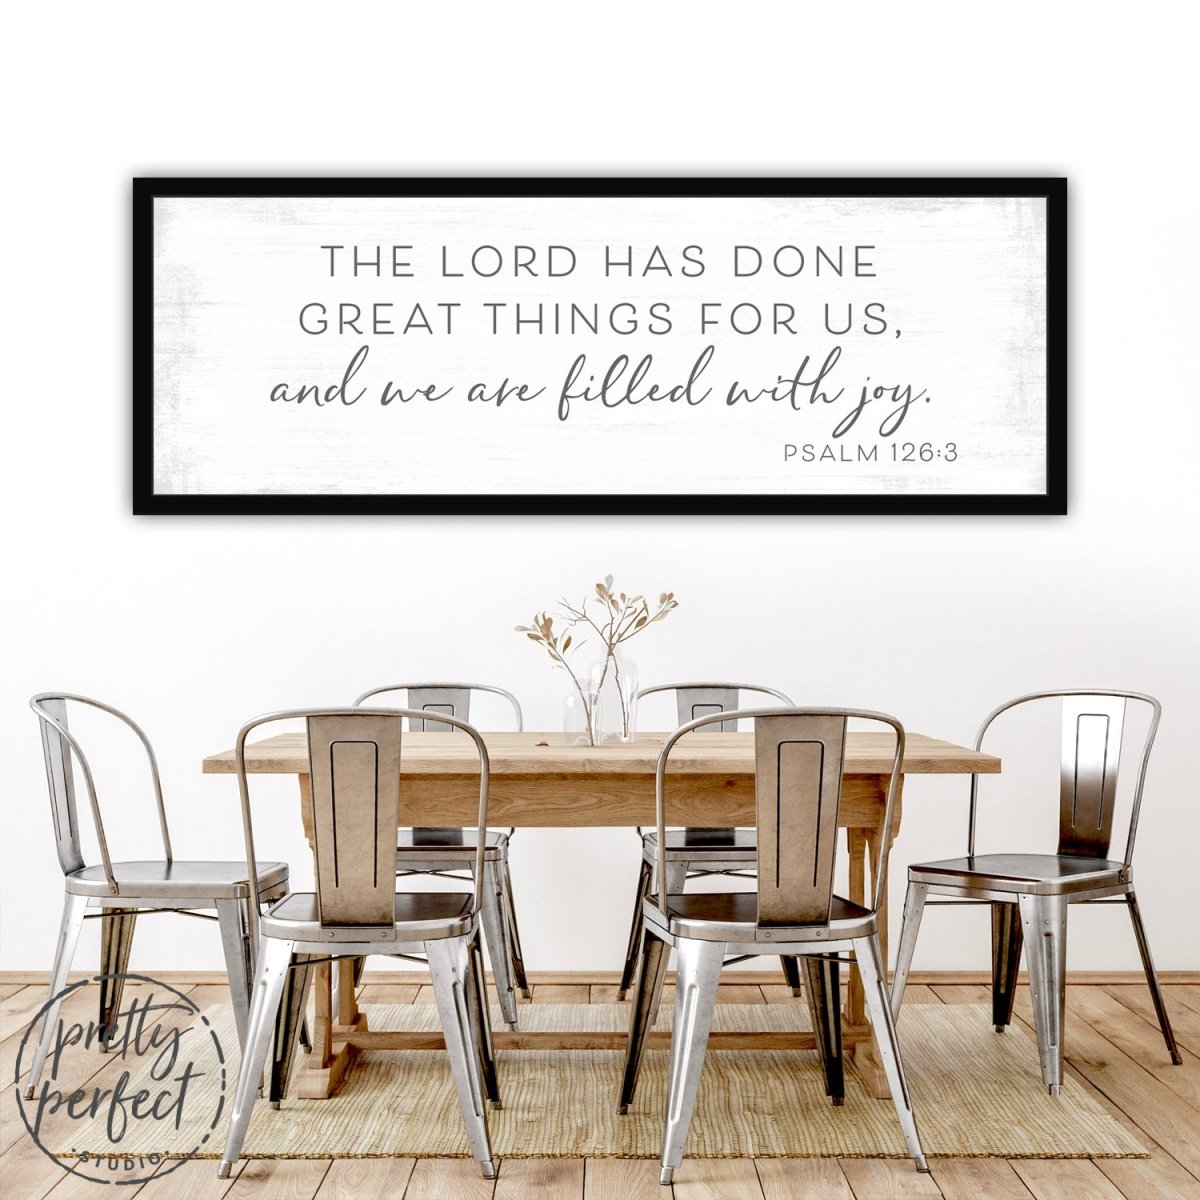 The Lord Has Done Great Things For Us Sign Above the Kitchen Table - Pretty Perfect Studio